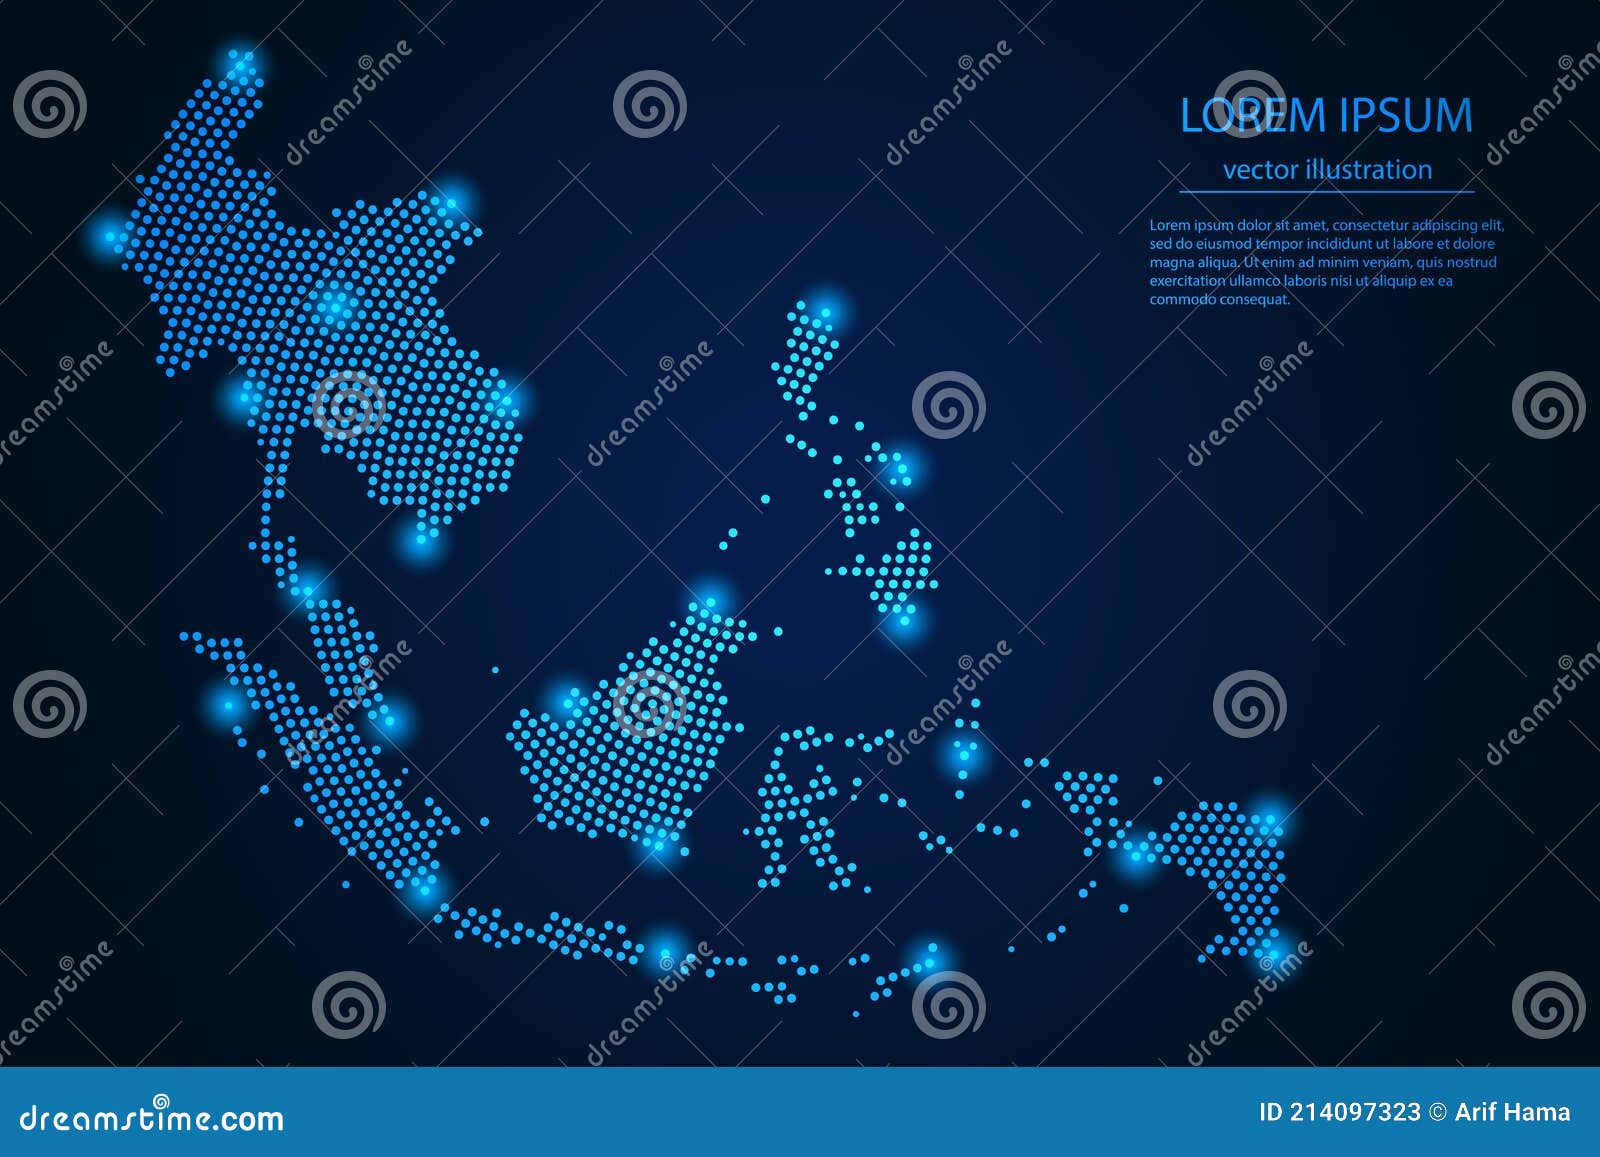 abstract image southeast asia map from point blue and glowing stars on a dark background